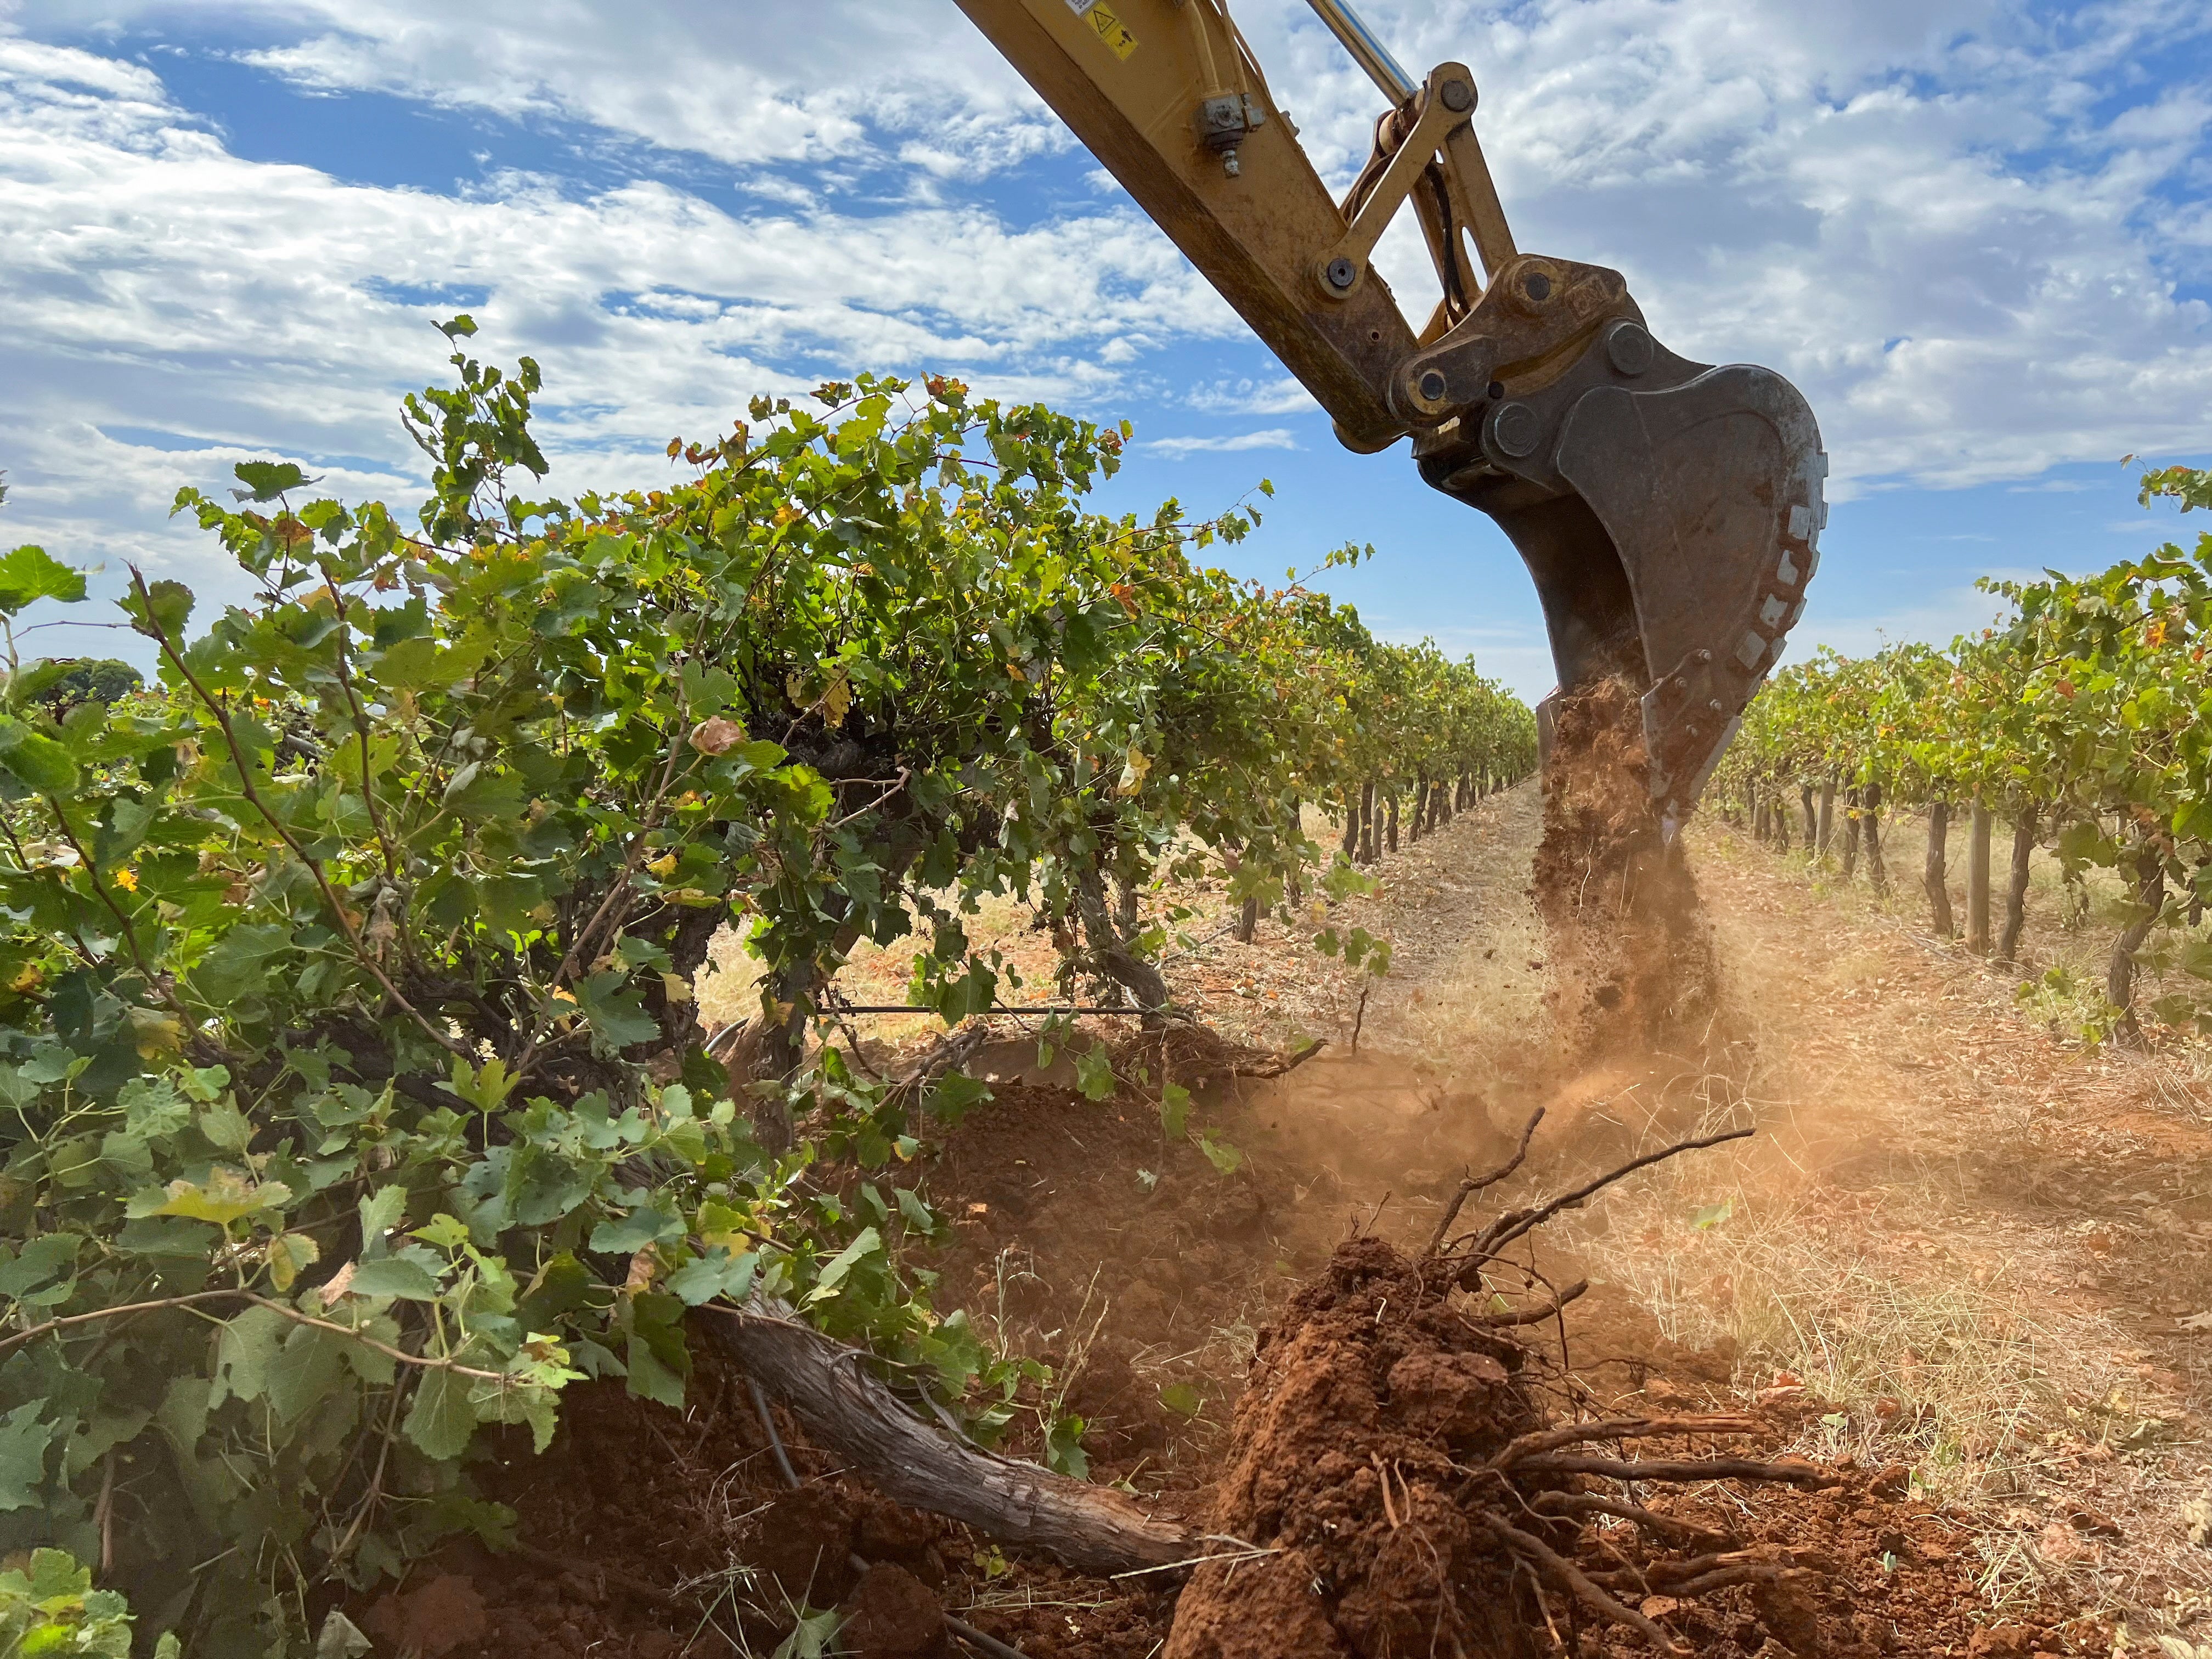 An excavator digs up vines near the town of Griffith in southeast Australia February 27